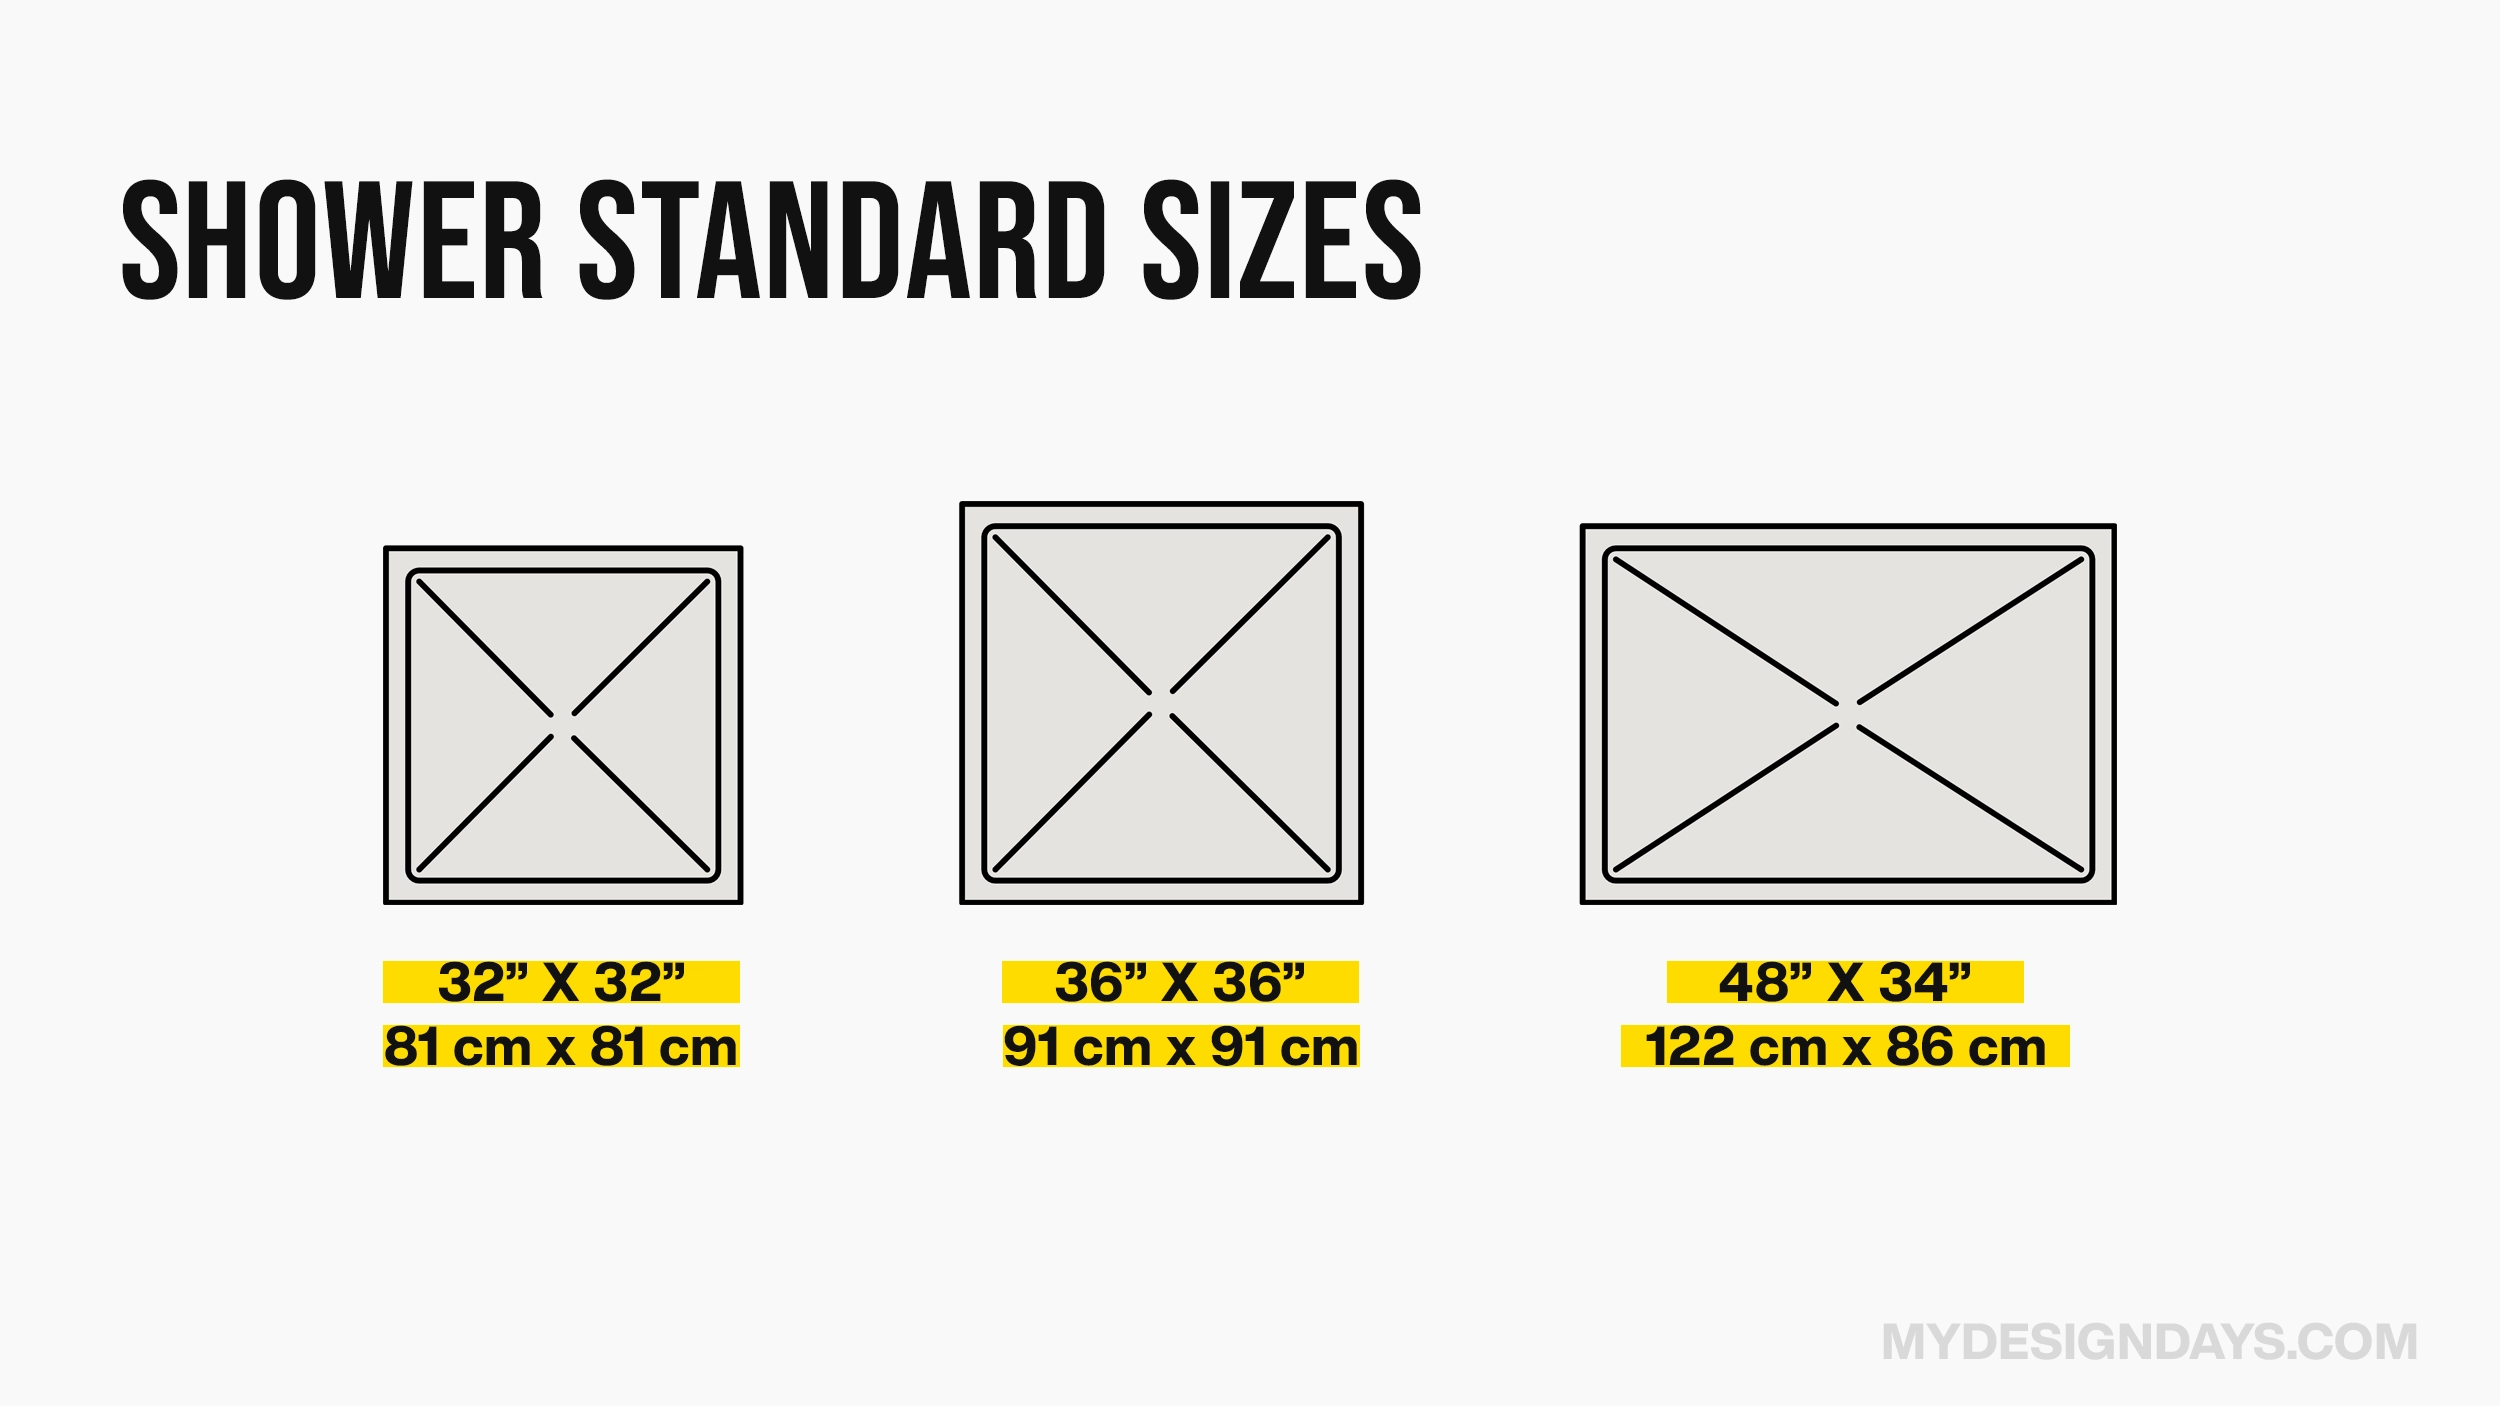 Shower Standard Sizes in CM and Inches